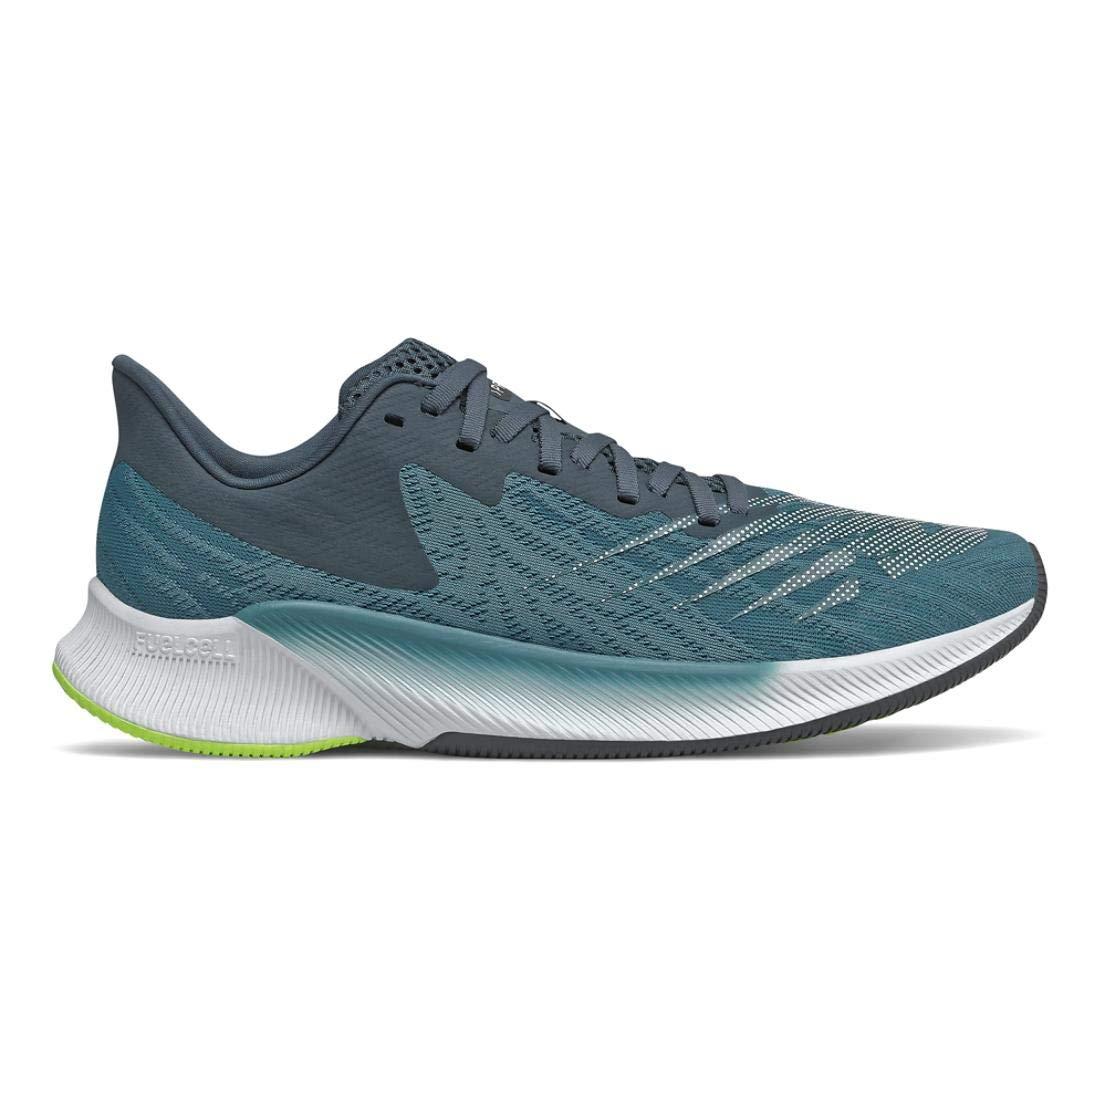 New Balance Fuelcell Prism V1 Running Shoe for Men - Lyst